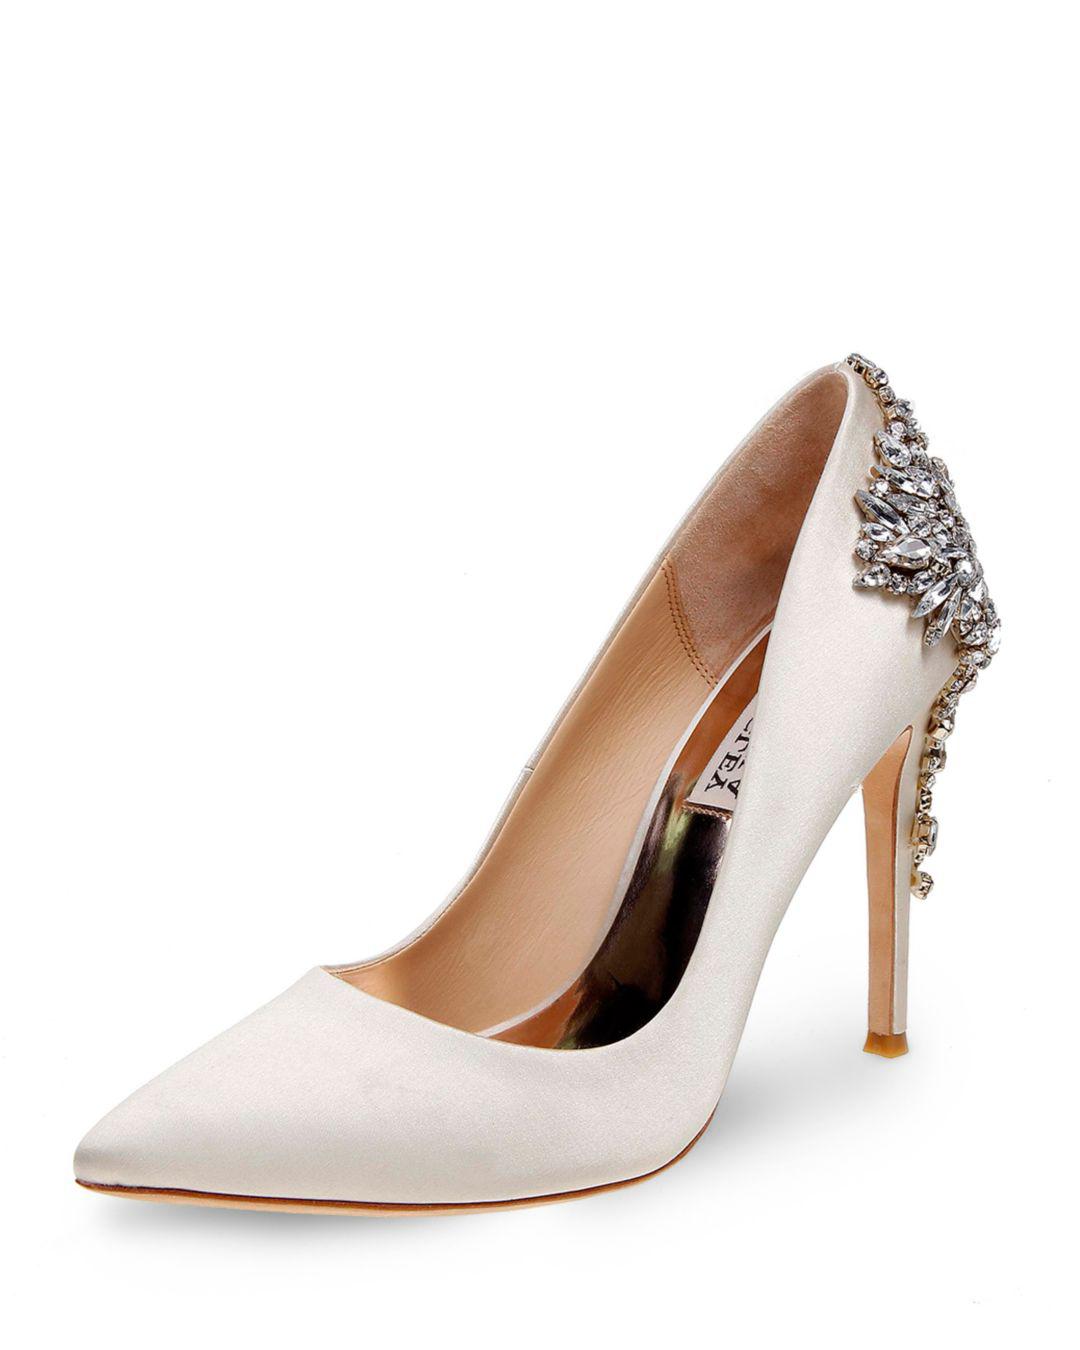 Badgley Mischka Gorgeous Embellished Pointed Toe Pumps in White - Lyst